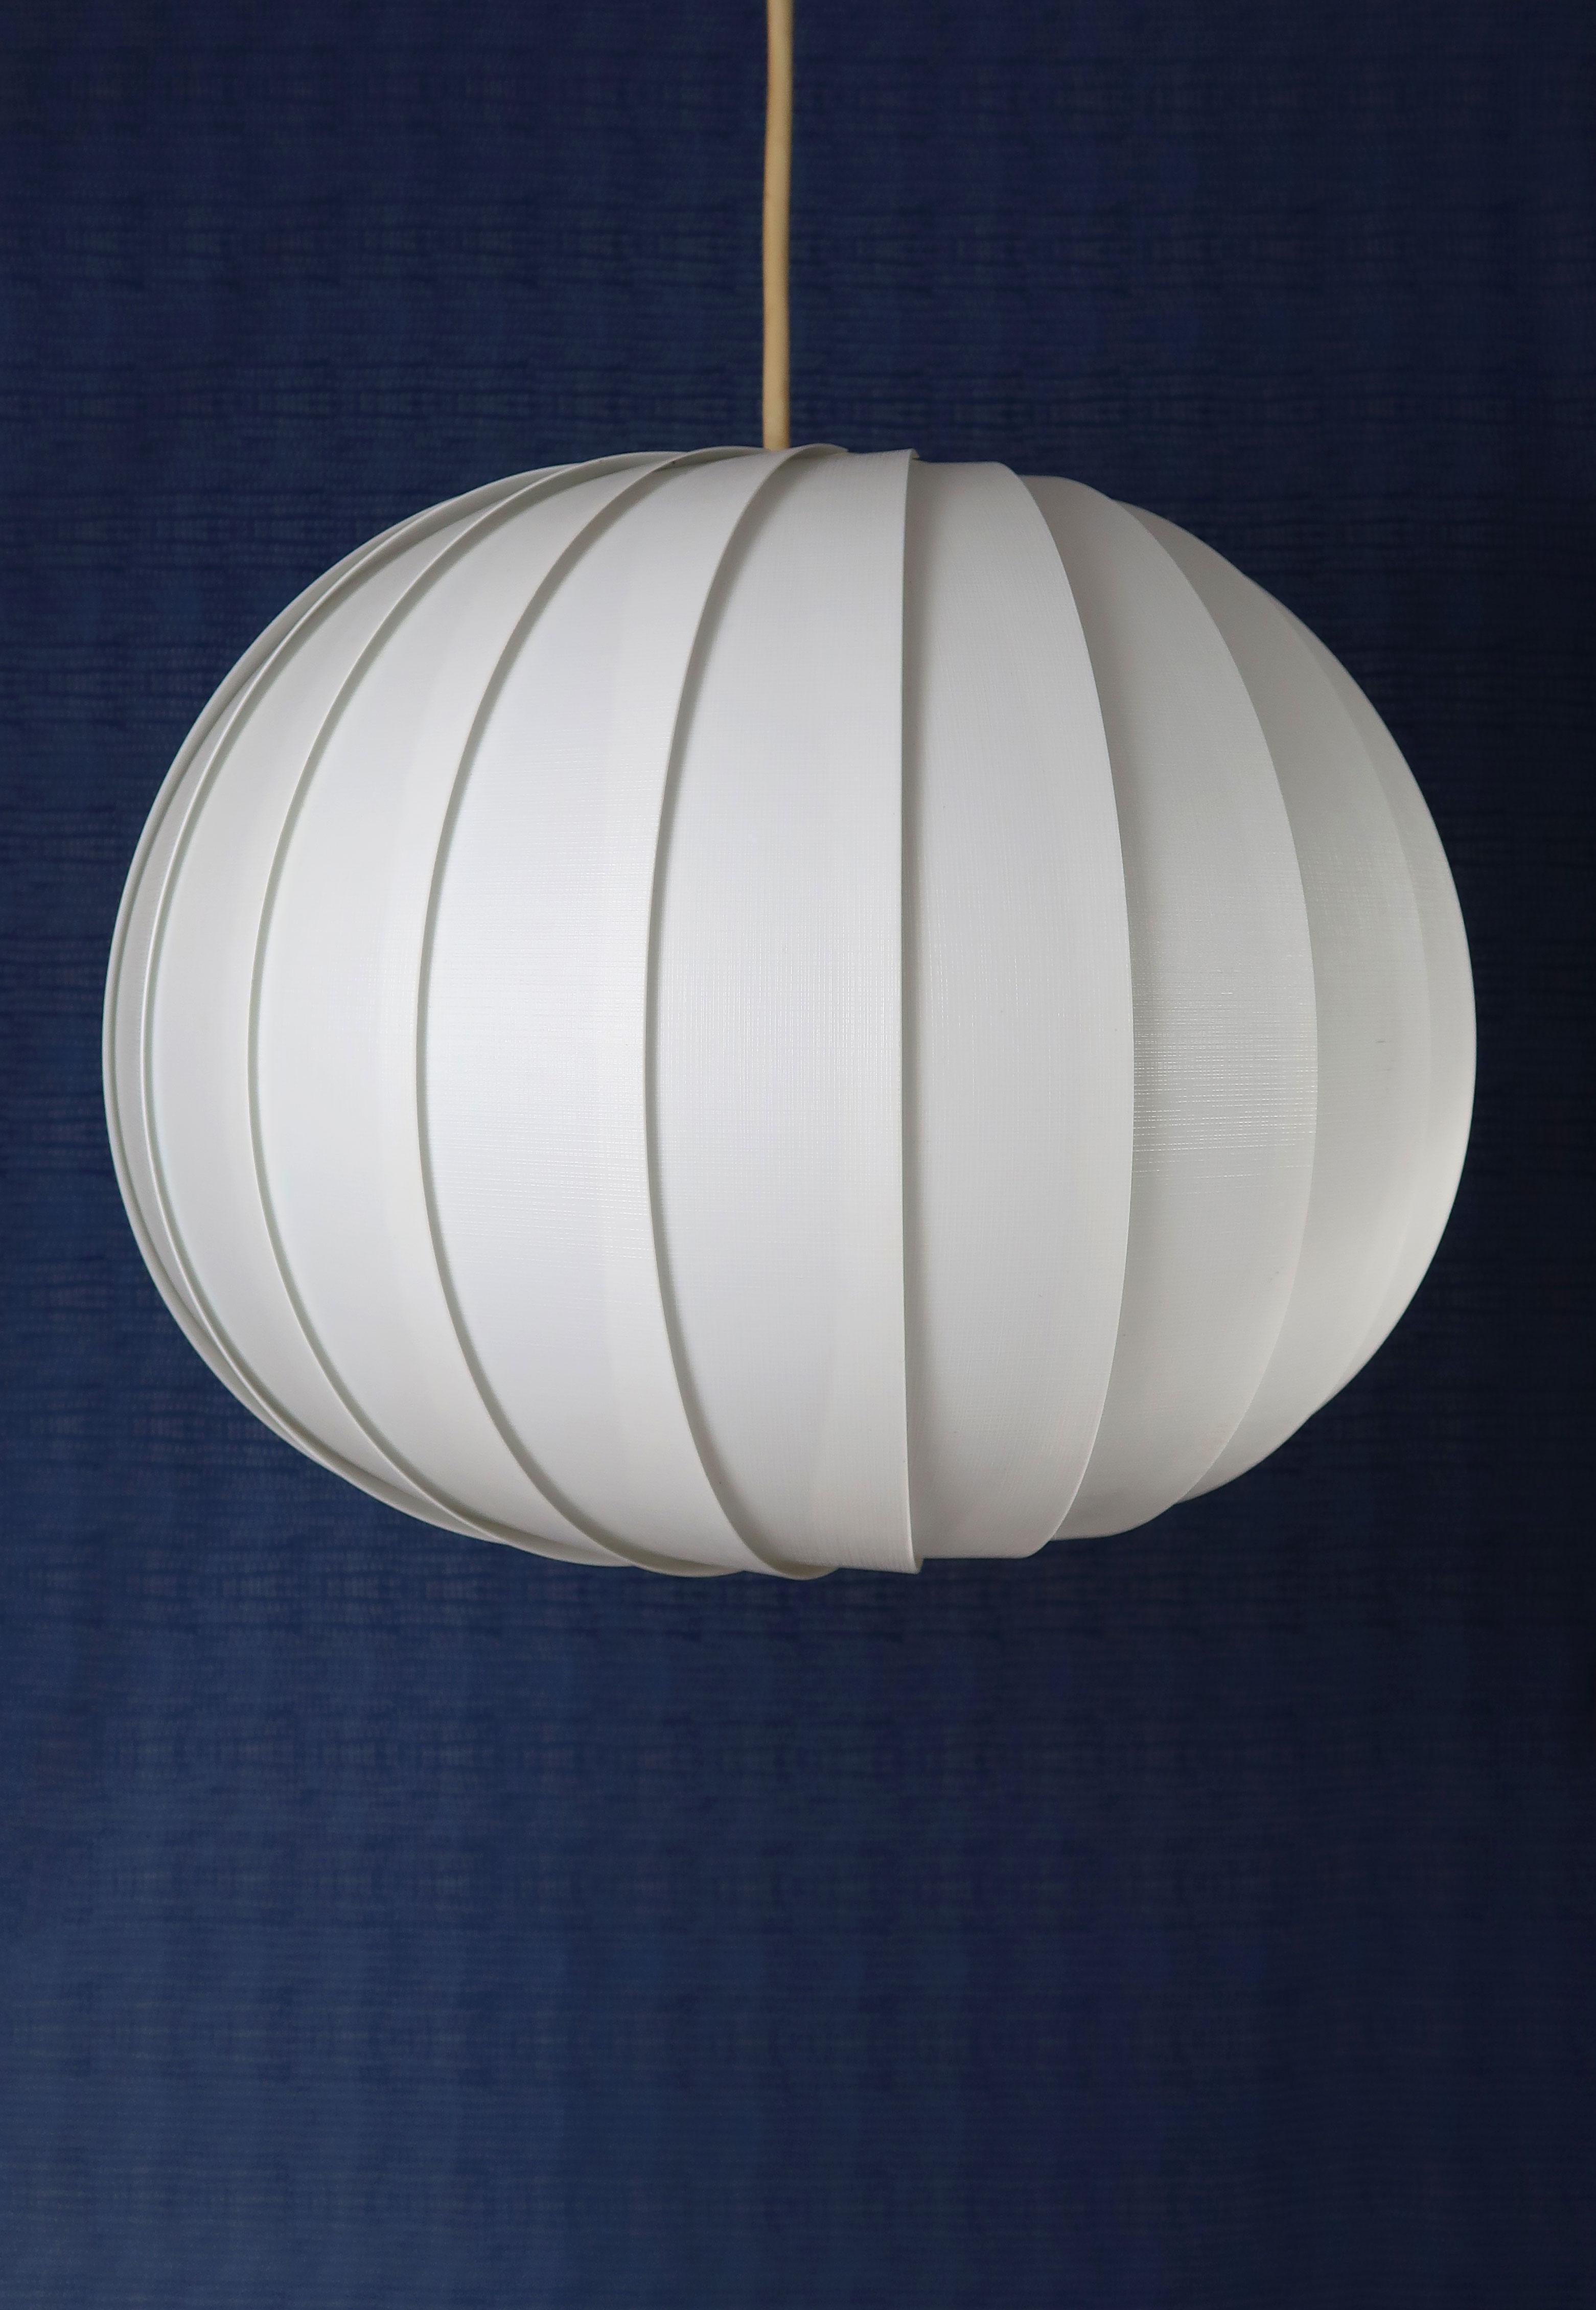 Scandinavian Mid-Century Modern spherical white acrylic pendant consisting of layered white, textured strips gathered on top and bottom creating an organic globe shape. Designed in 1972 by Lars Eiler Schiøler (1913-1982) for Høyrup Lights. Model